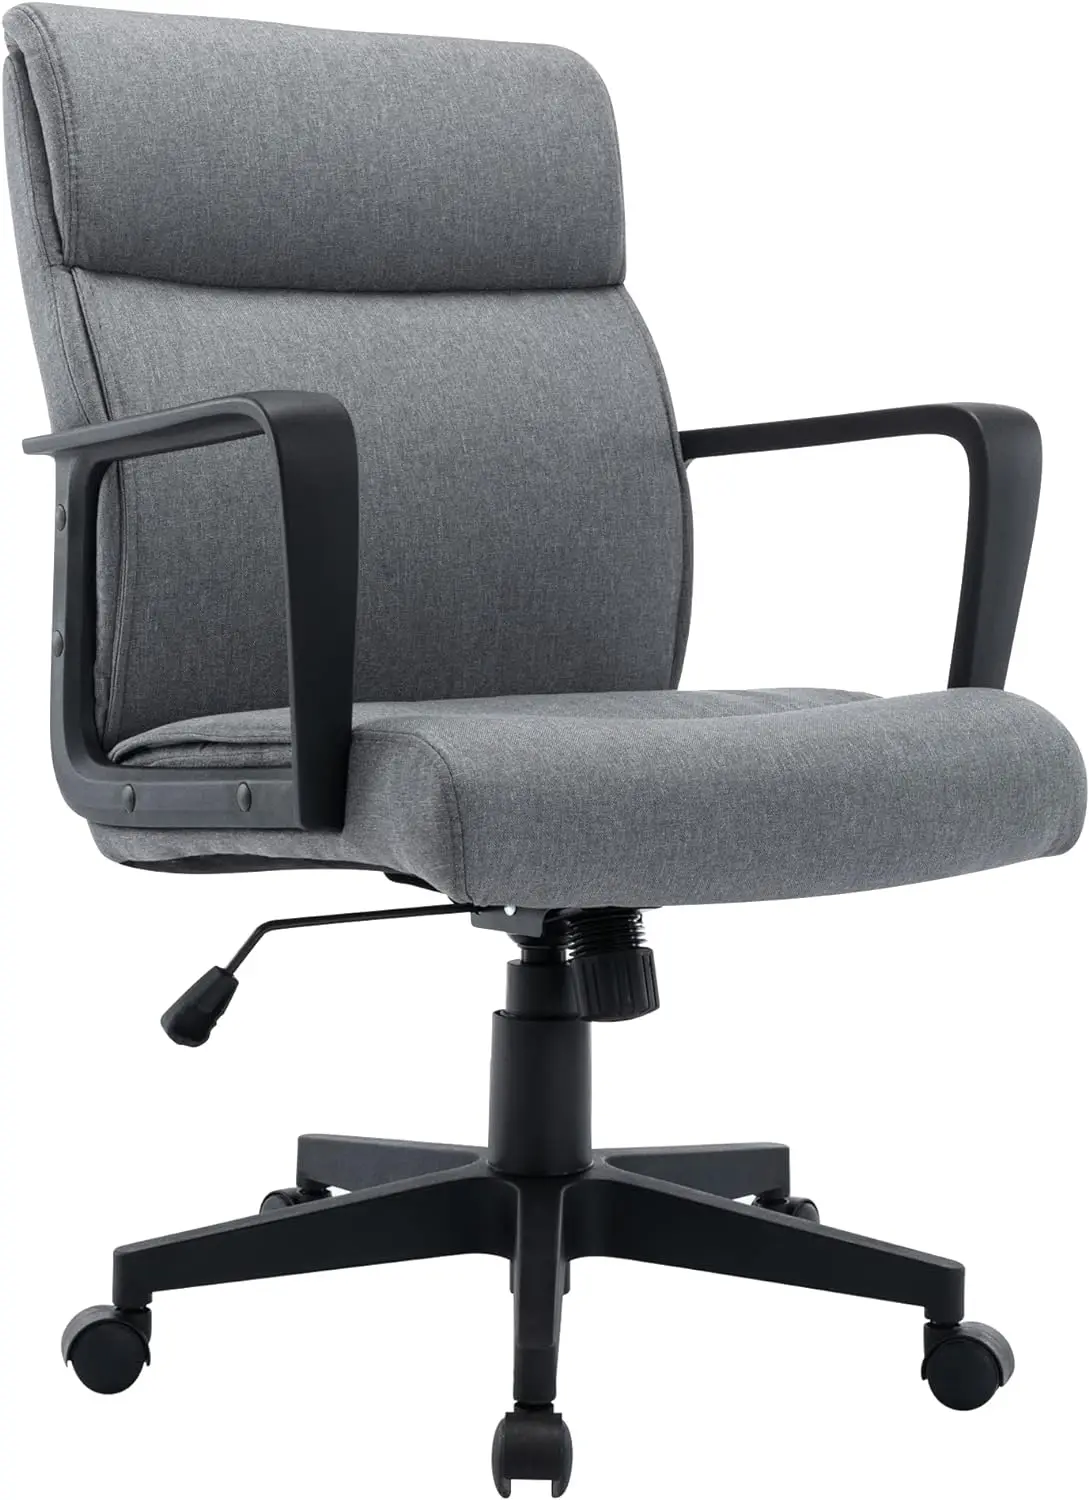 

Office Chair, Desk Chair Adjustable Ergonomic Executive Computer Task Game Armchair, Swivel Rolling Chair, Inner Spring Cushion